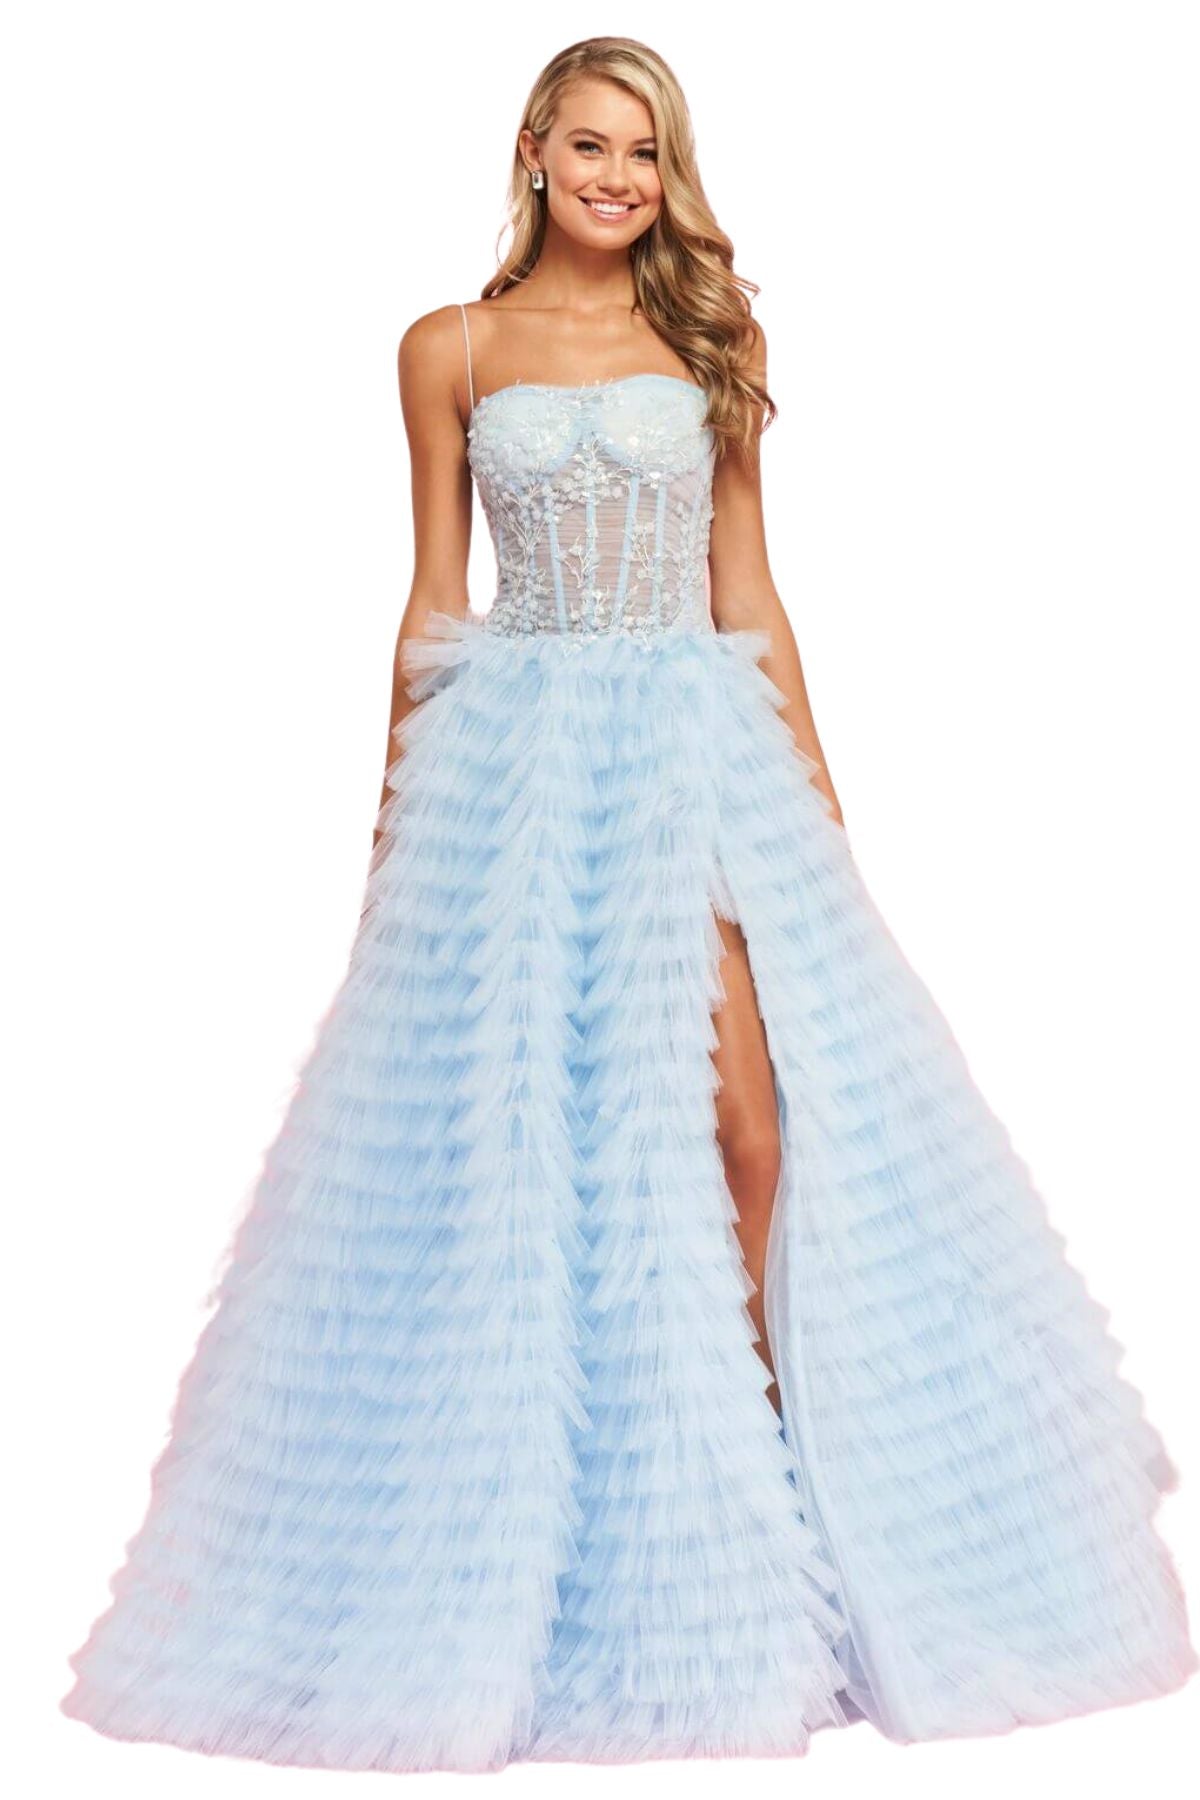 Rent SHERI HILL Magnolia Gown 54189 (Blue) - Rent this dress!